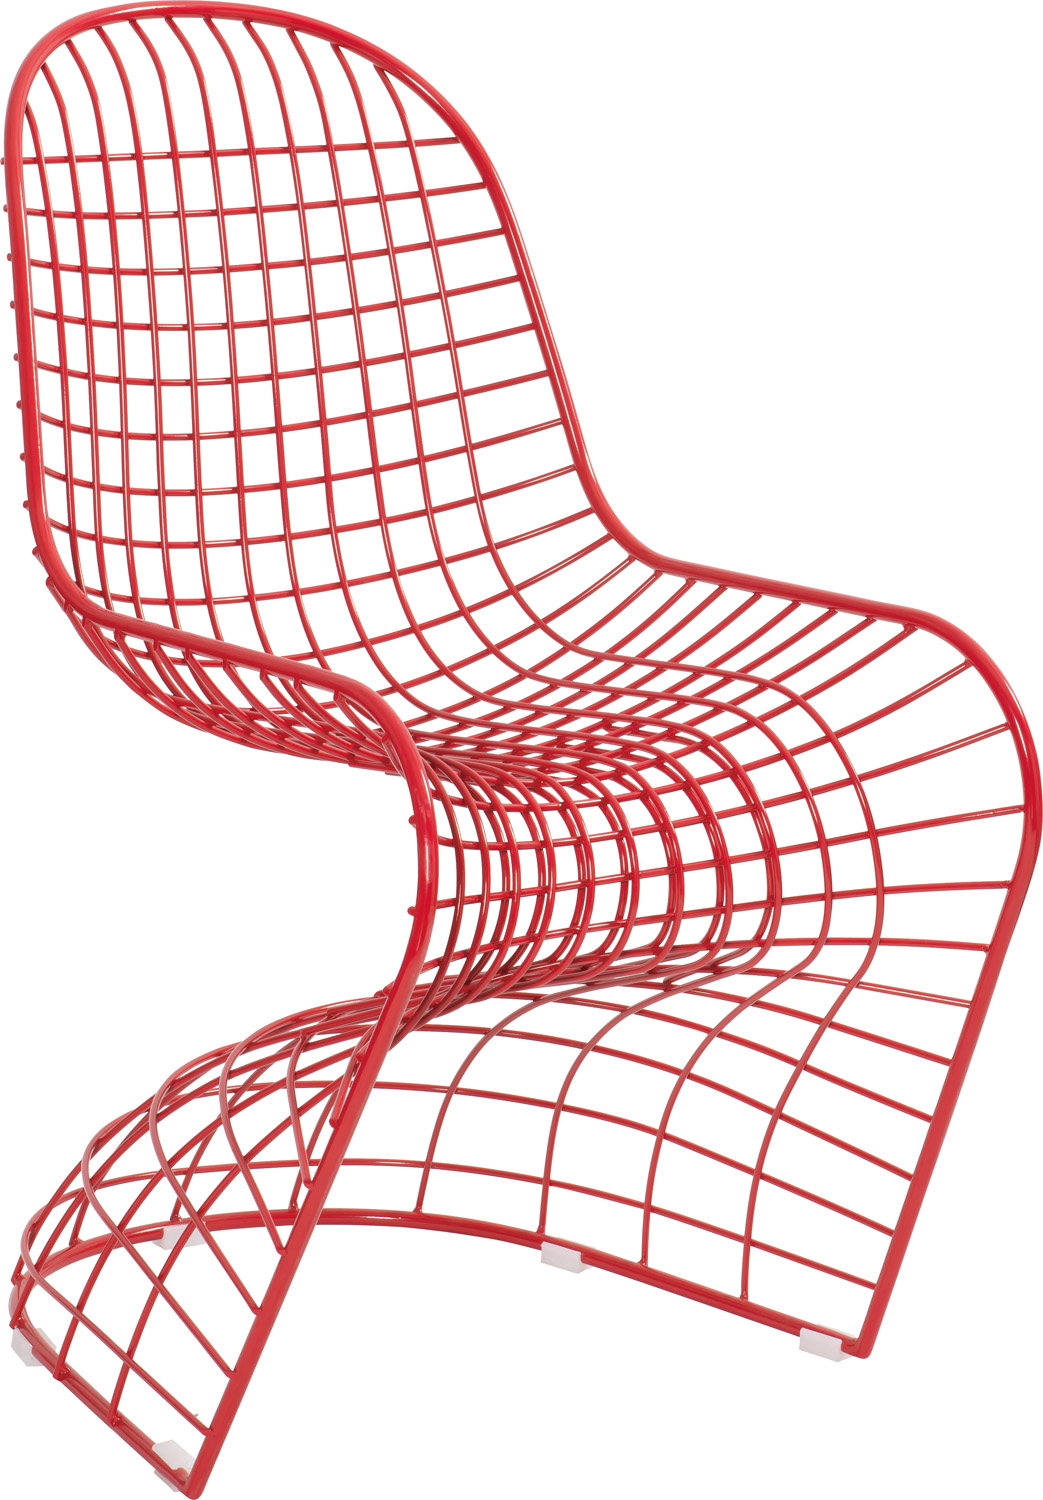 JS-8018 metal wire chair